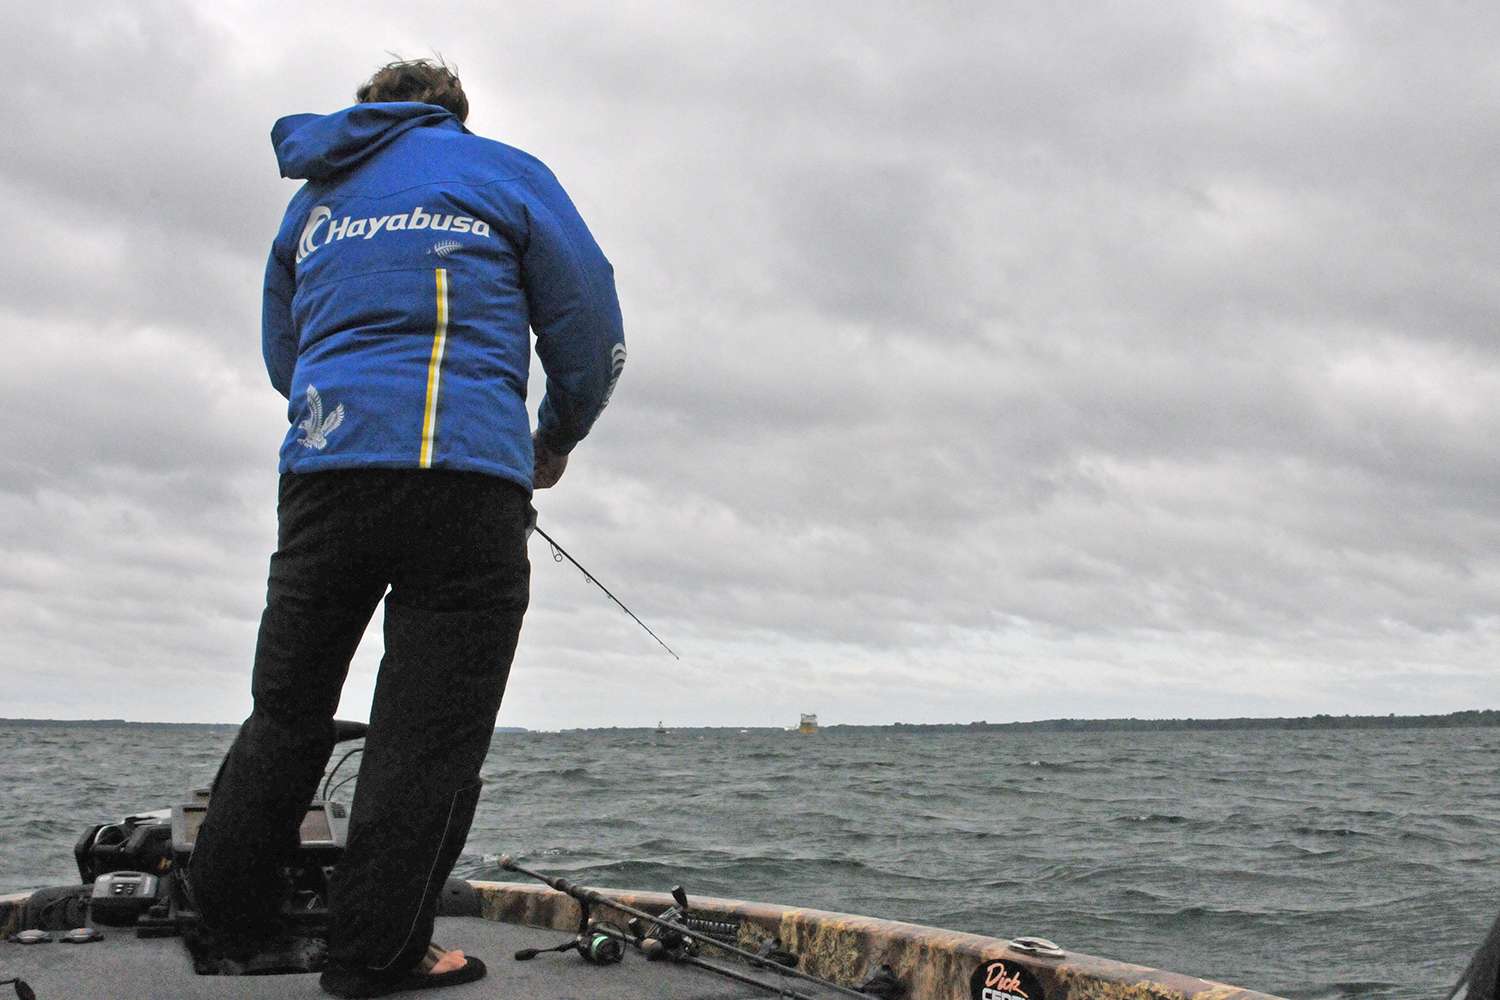 High winds, heavy skies and fast current combined to make fishing tough for Cliff Pirch on the final day of practice.